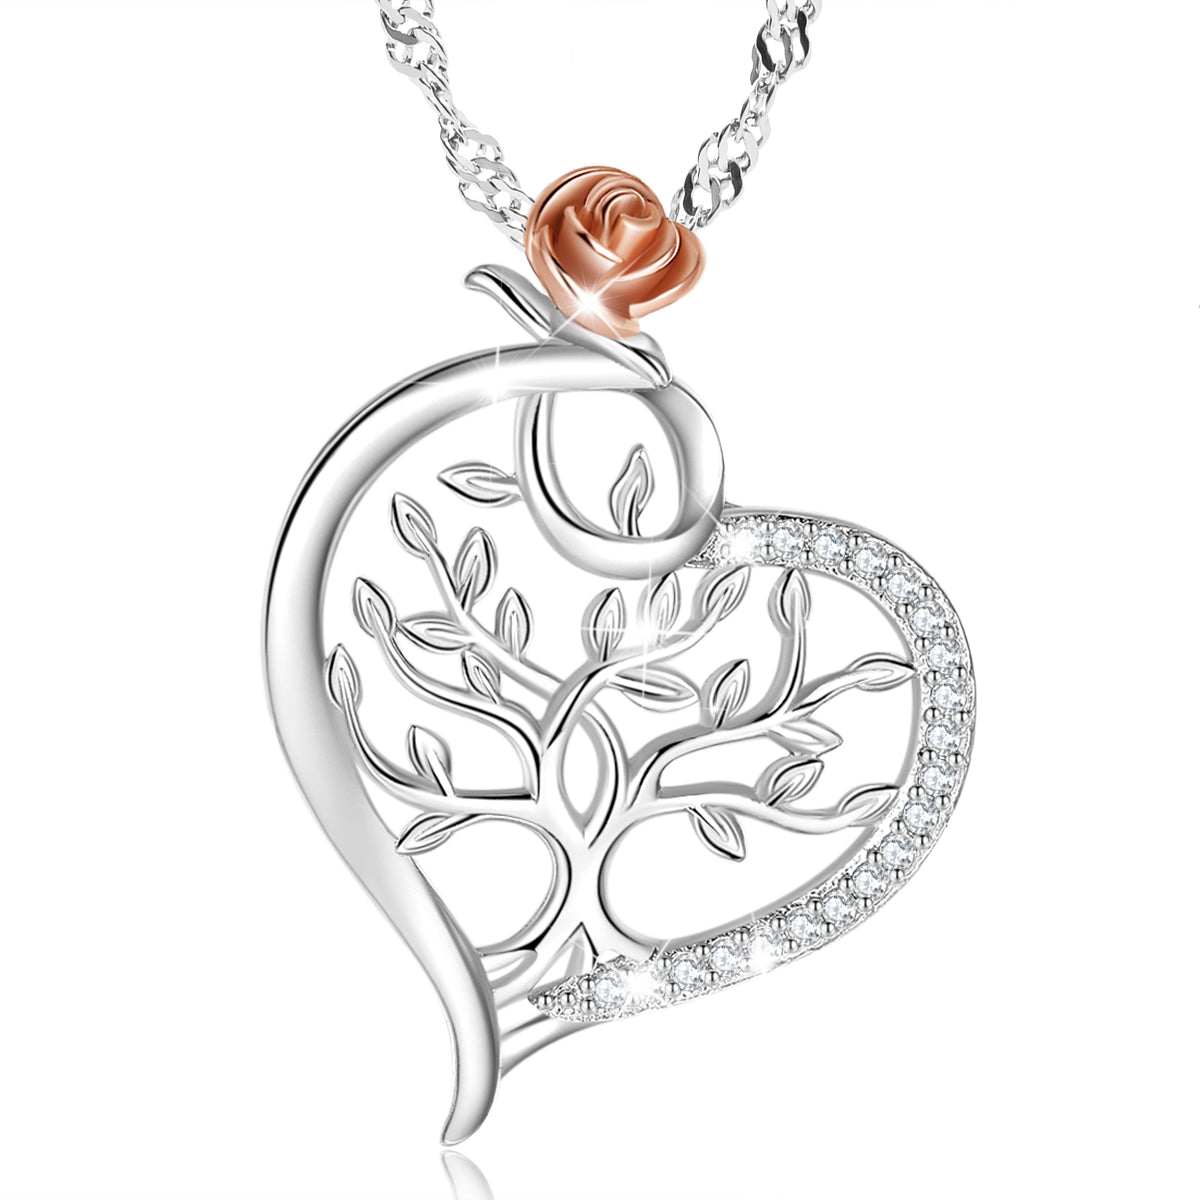 Tree of Life Crystal Heart pendant with 925 Sterling Silver Water Wave necklace chain 18"